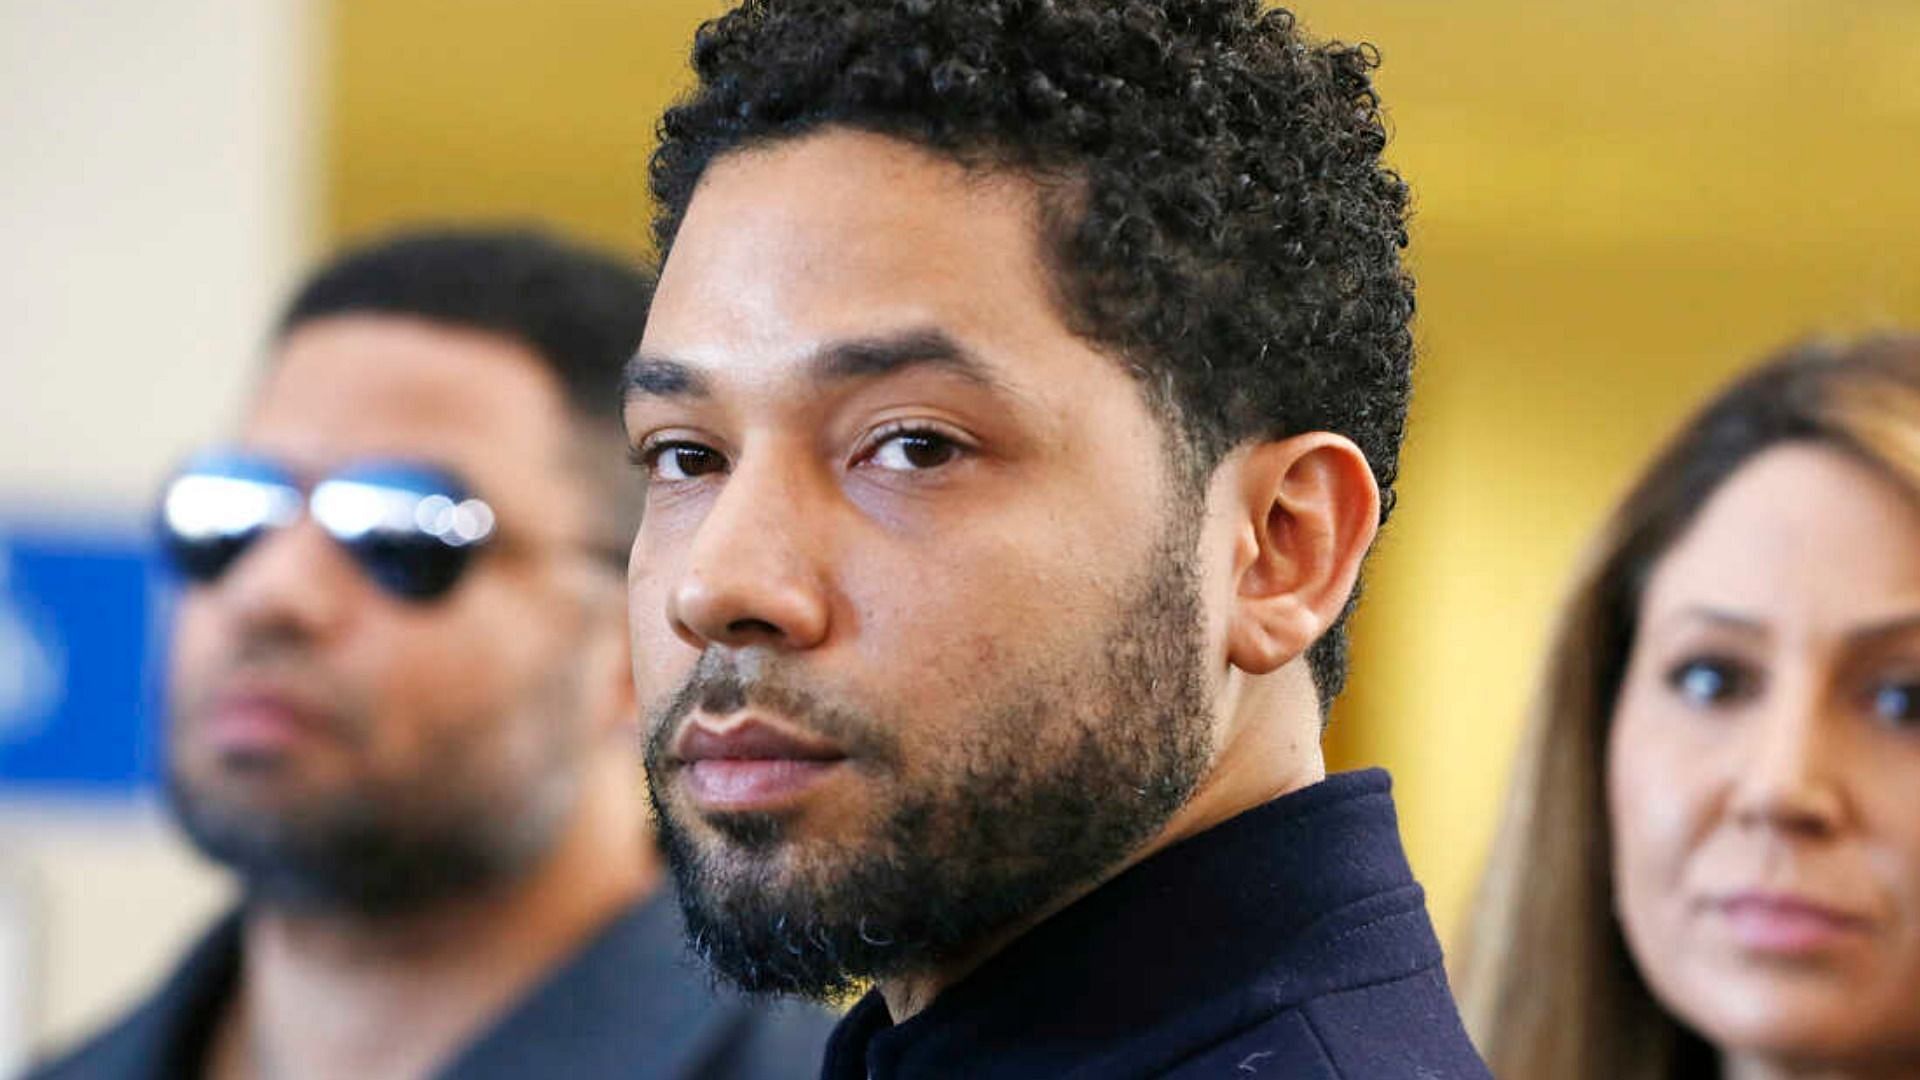 Jussie Smollett staged a hate crime in 2019 (Image via Getty Images/ Nuccio DiNuzzo)